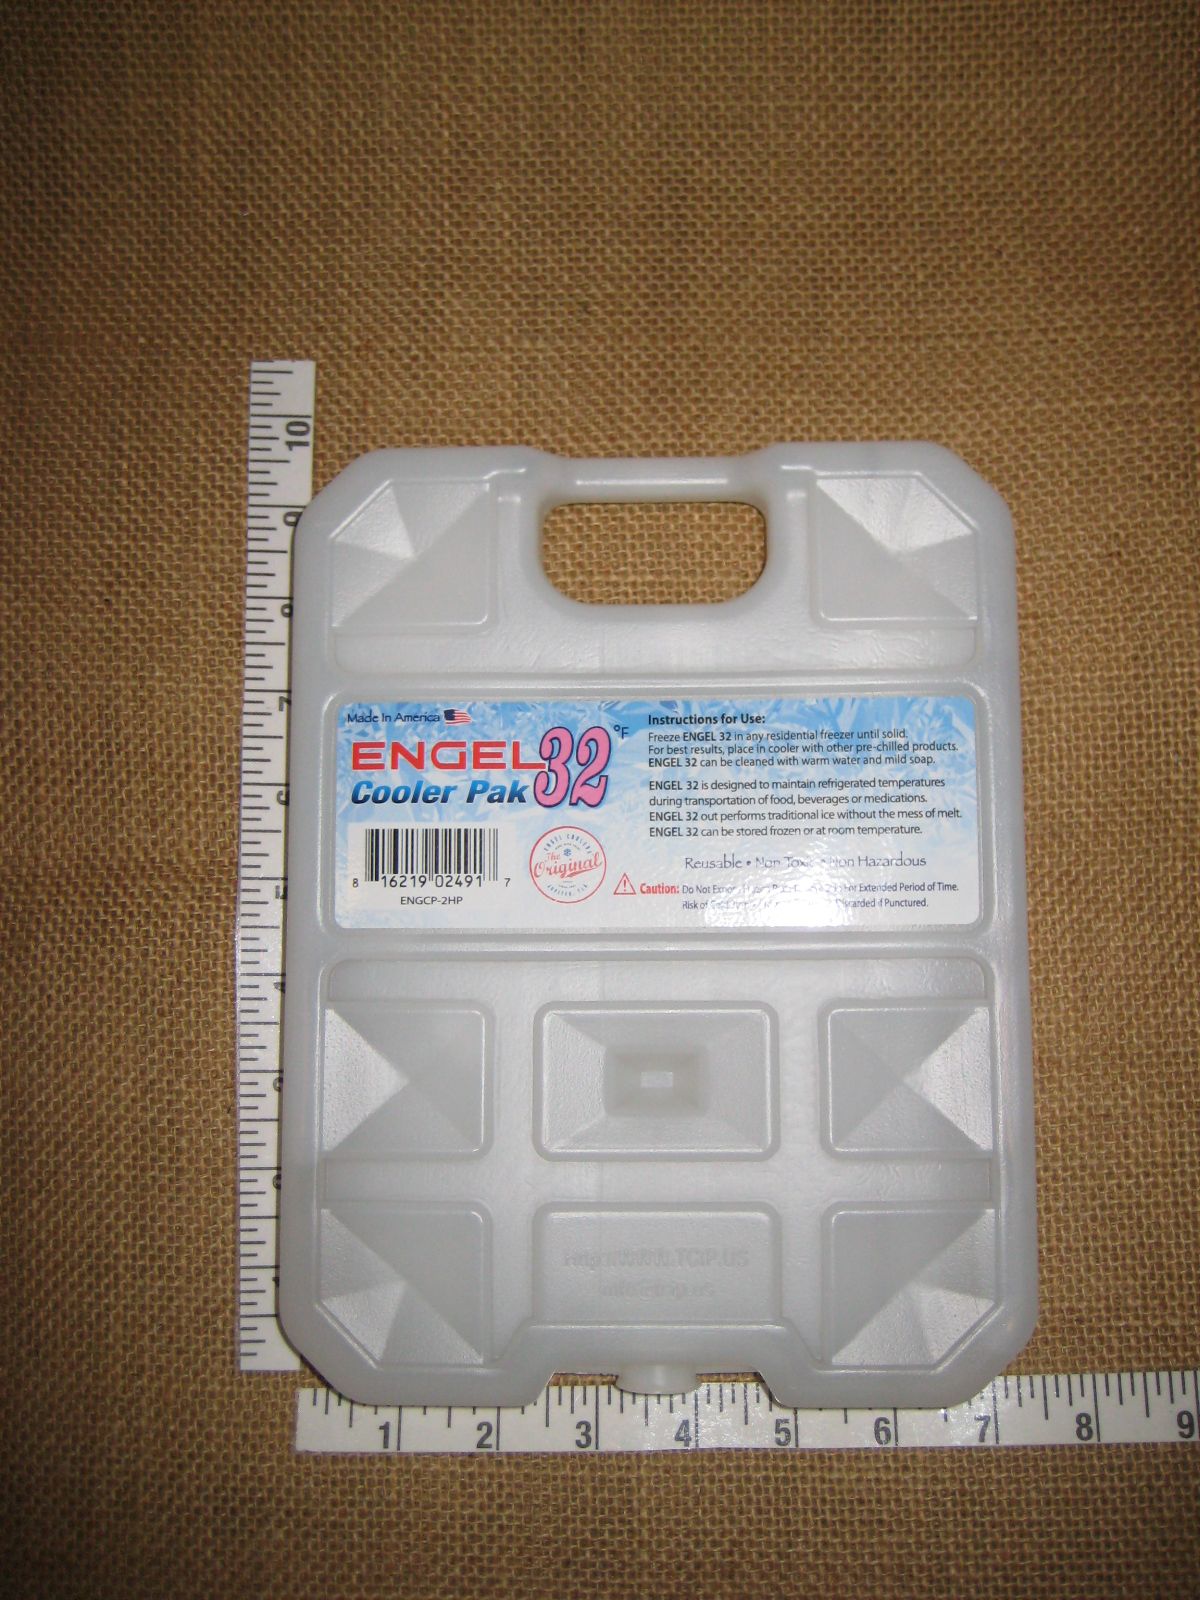 Engel 32 Degree Medium Non Toxic Hard Shell Cooler Pak Ice Gel Cold Pack, 2 Lbs. - image 2 of 3